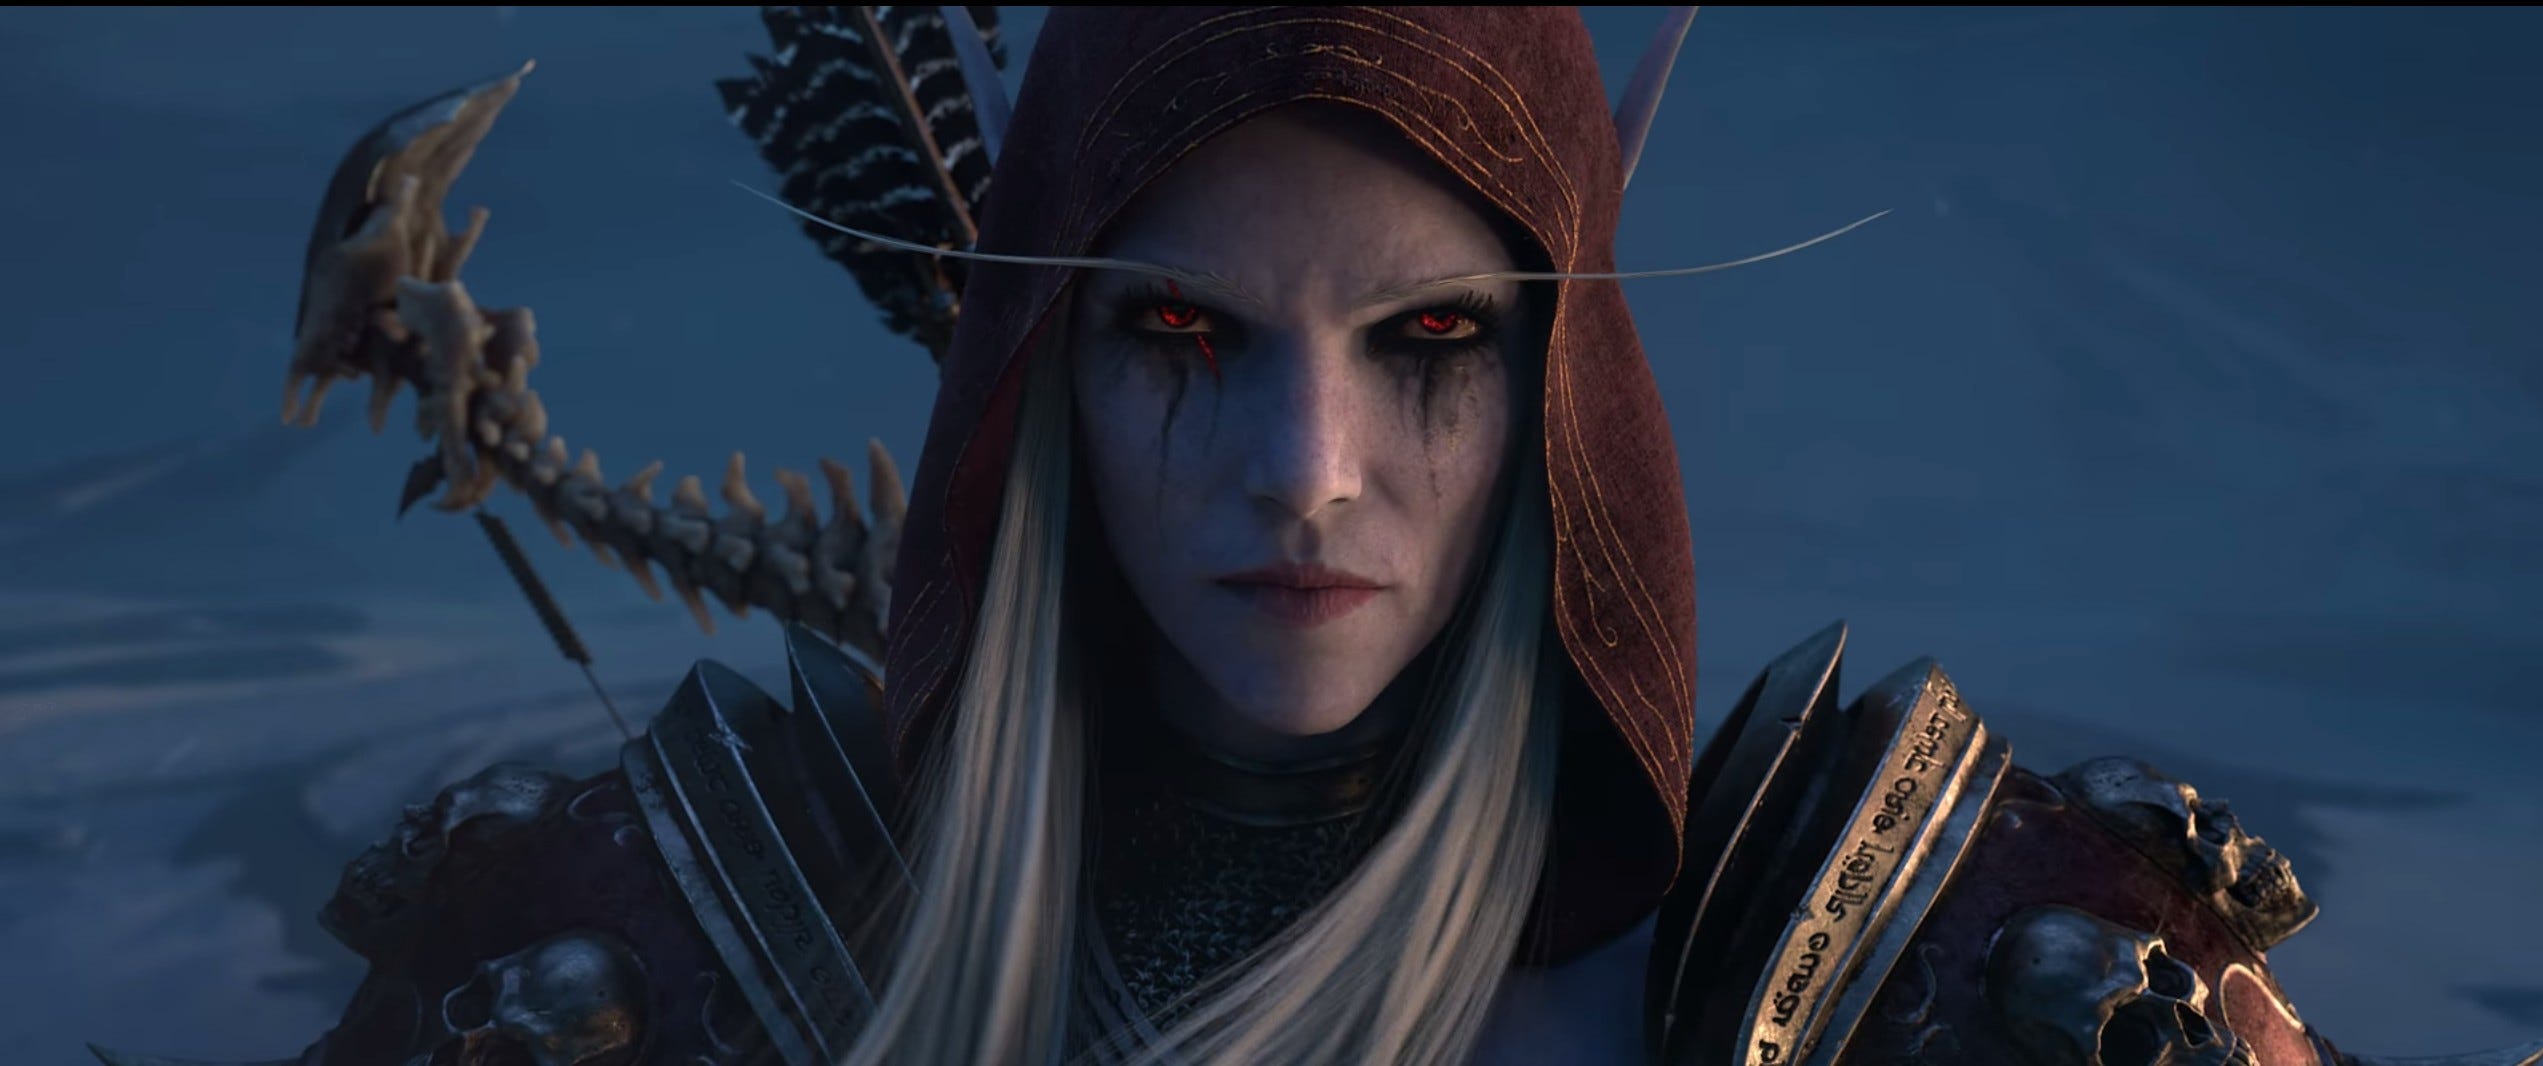 A close-up photo of the one and only Sylvanas Windrunner